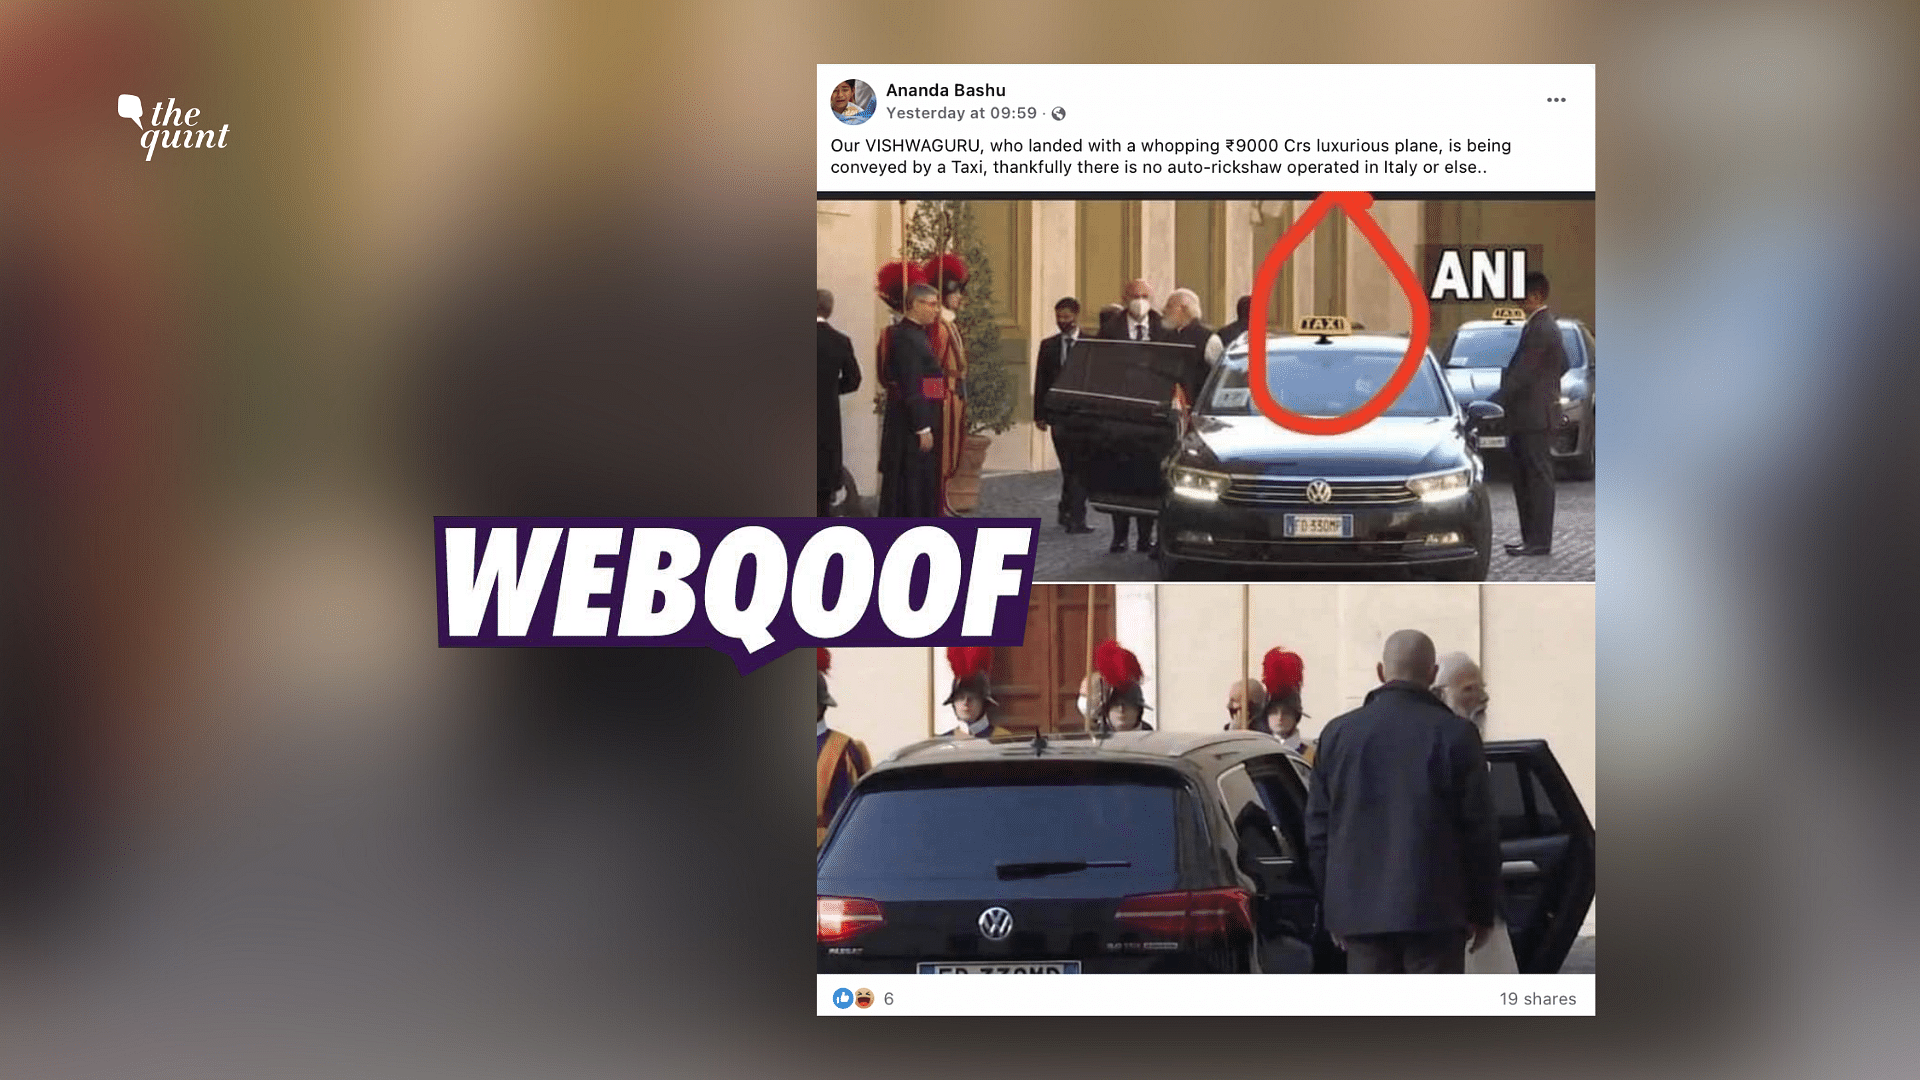 <div class="paragraphs"><p>Photos of the PM's visit to the Vatican were edited to make it seem like he travelled in a taxi.</p></div>